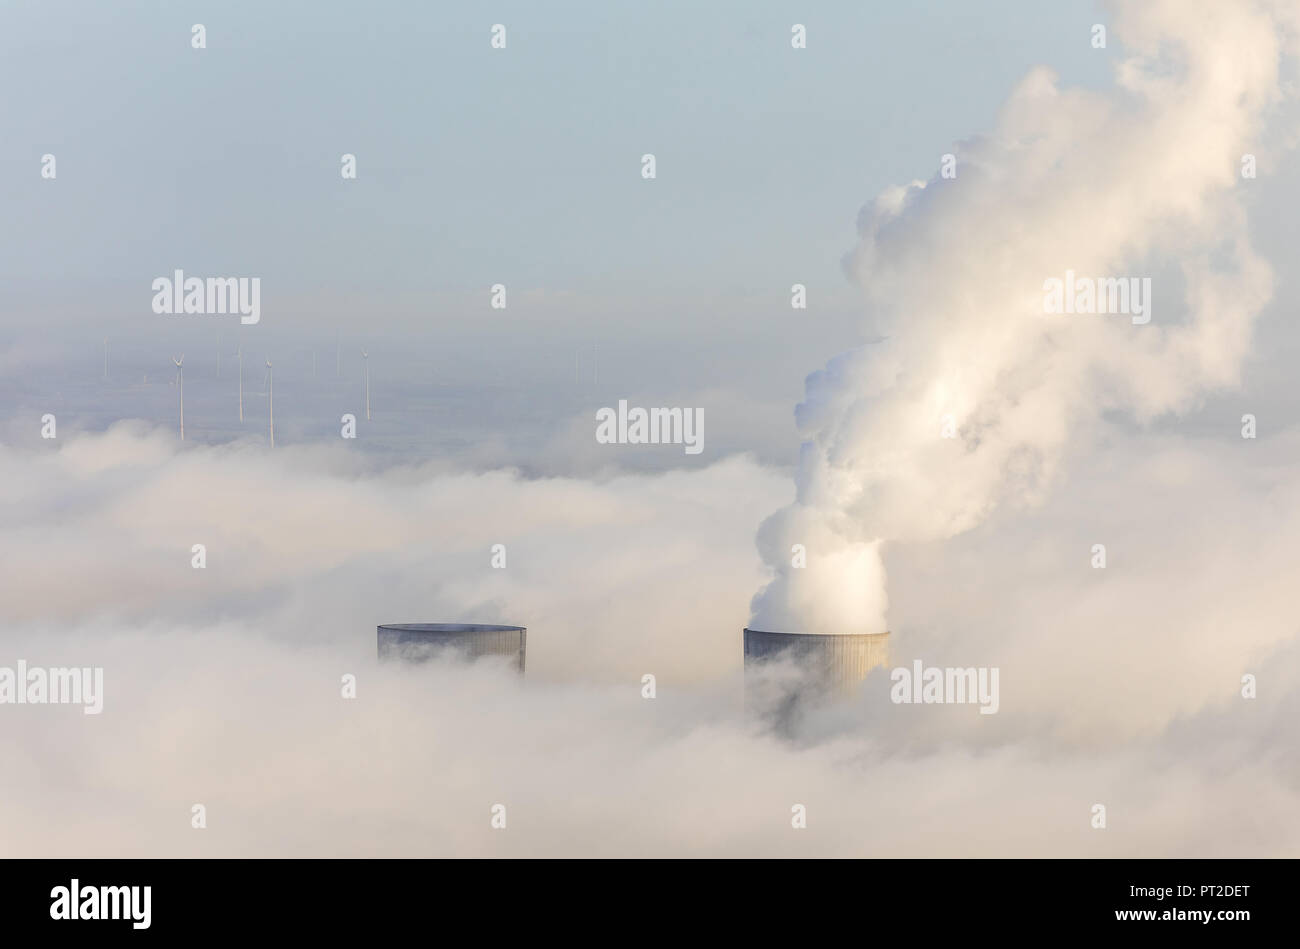 RWE Westfalen power plant, morning fog, clouds, the power plant emerging from the low cloud cover, Hamm, Ruhr area, North Rhine-Westphalia, Germany Stock Photo